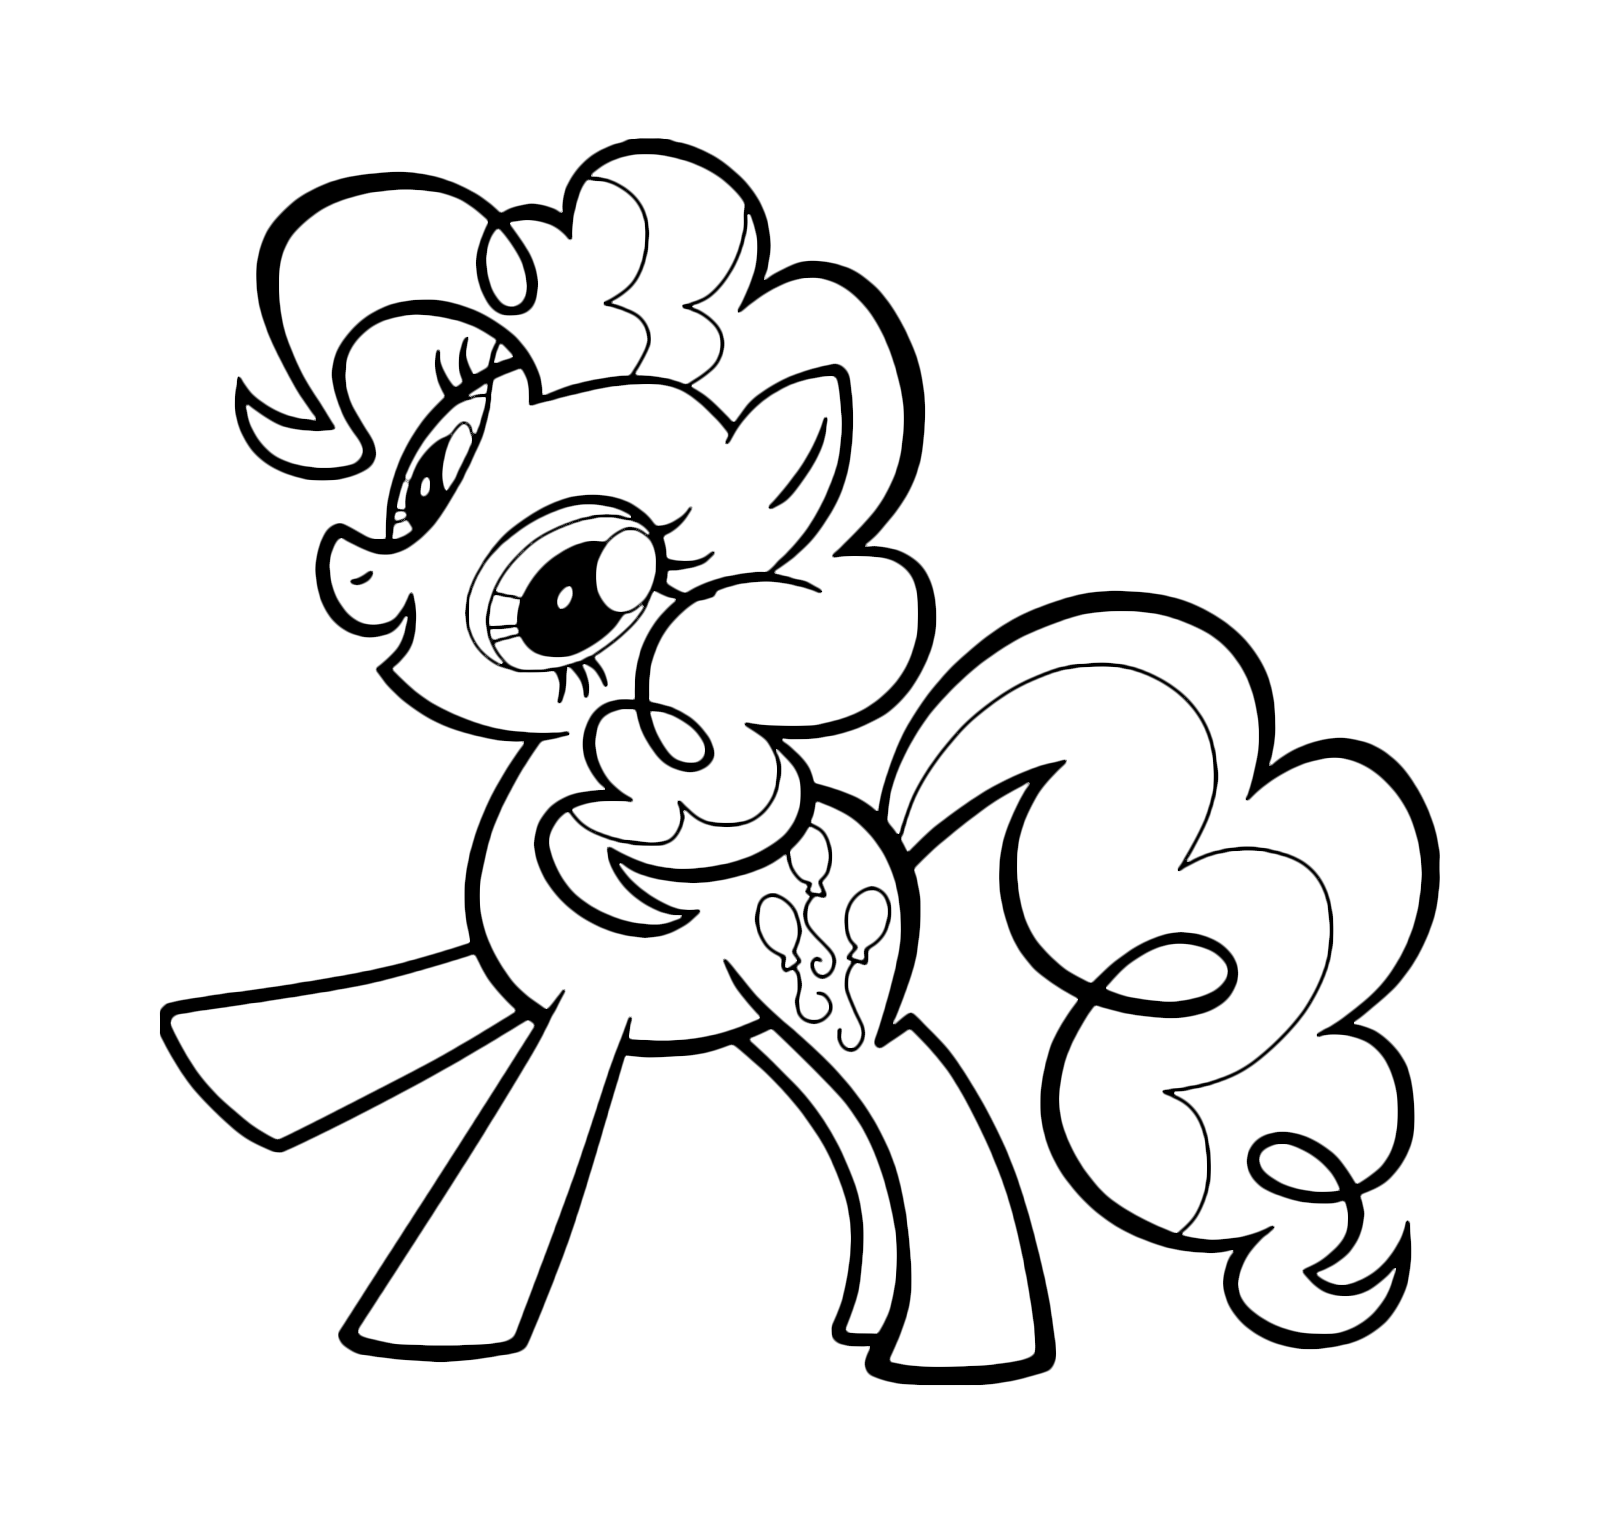 My Little Pony - Pinkie Pie with a very happy look